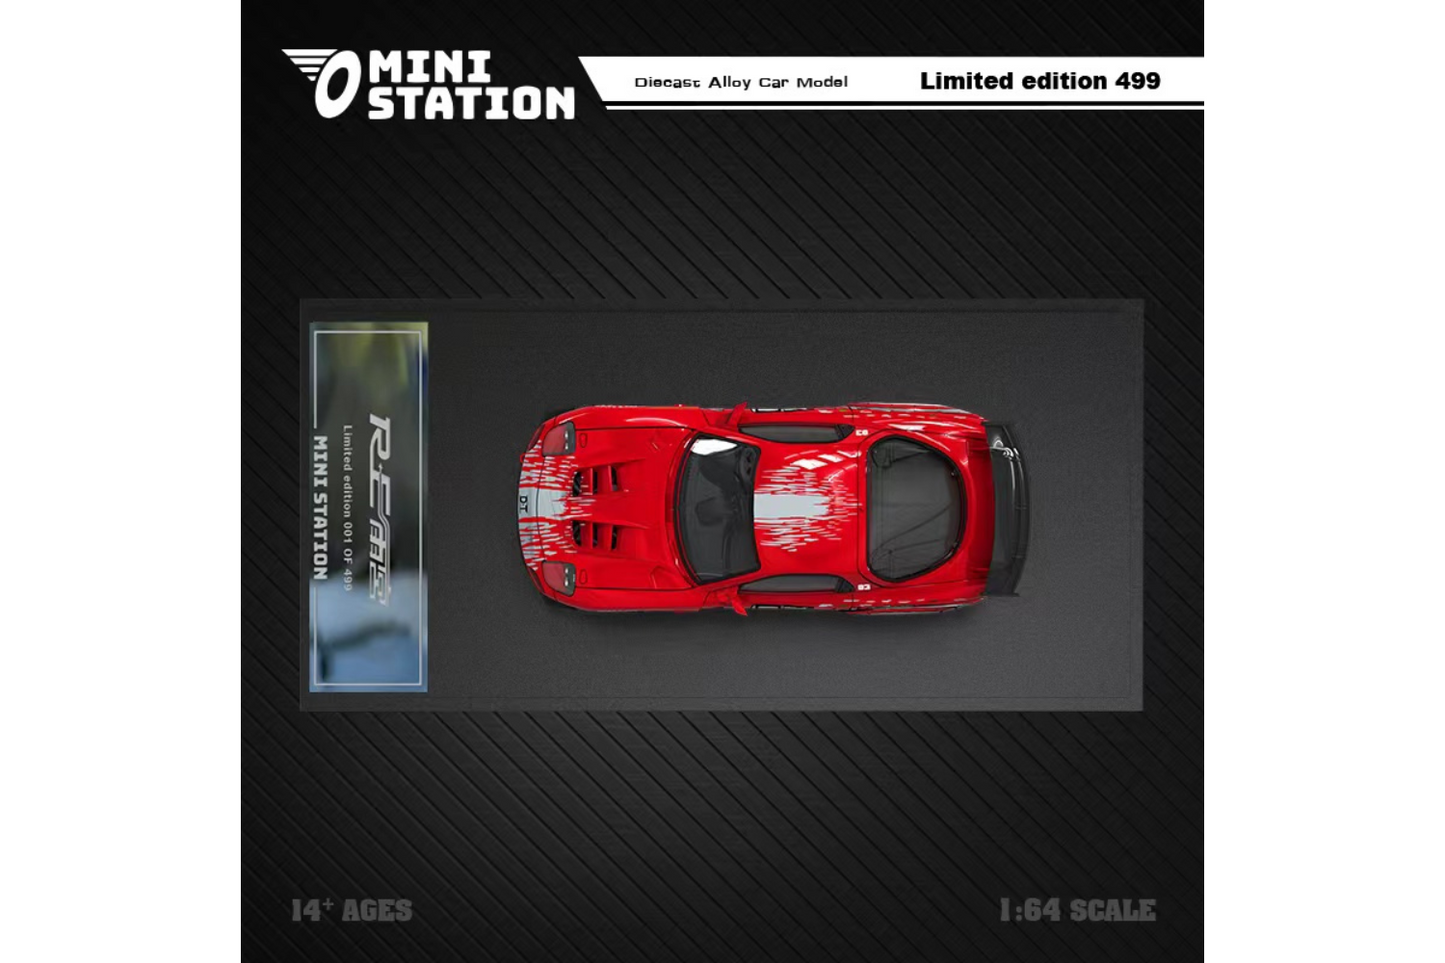 Mini Station 1/64 Mazda RX-7 (FD3S) Dom's Fast and Furious Tribute Livery